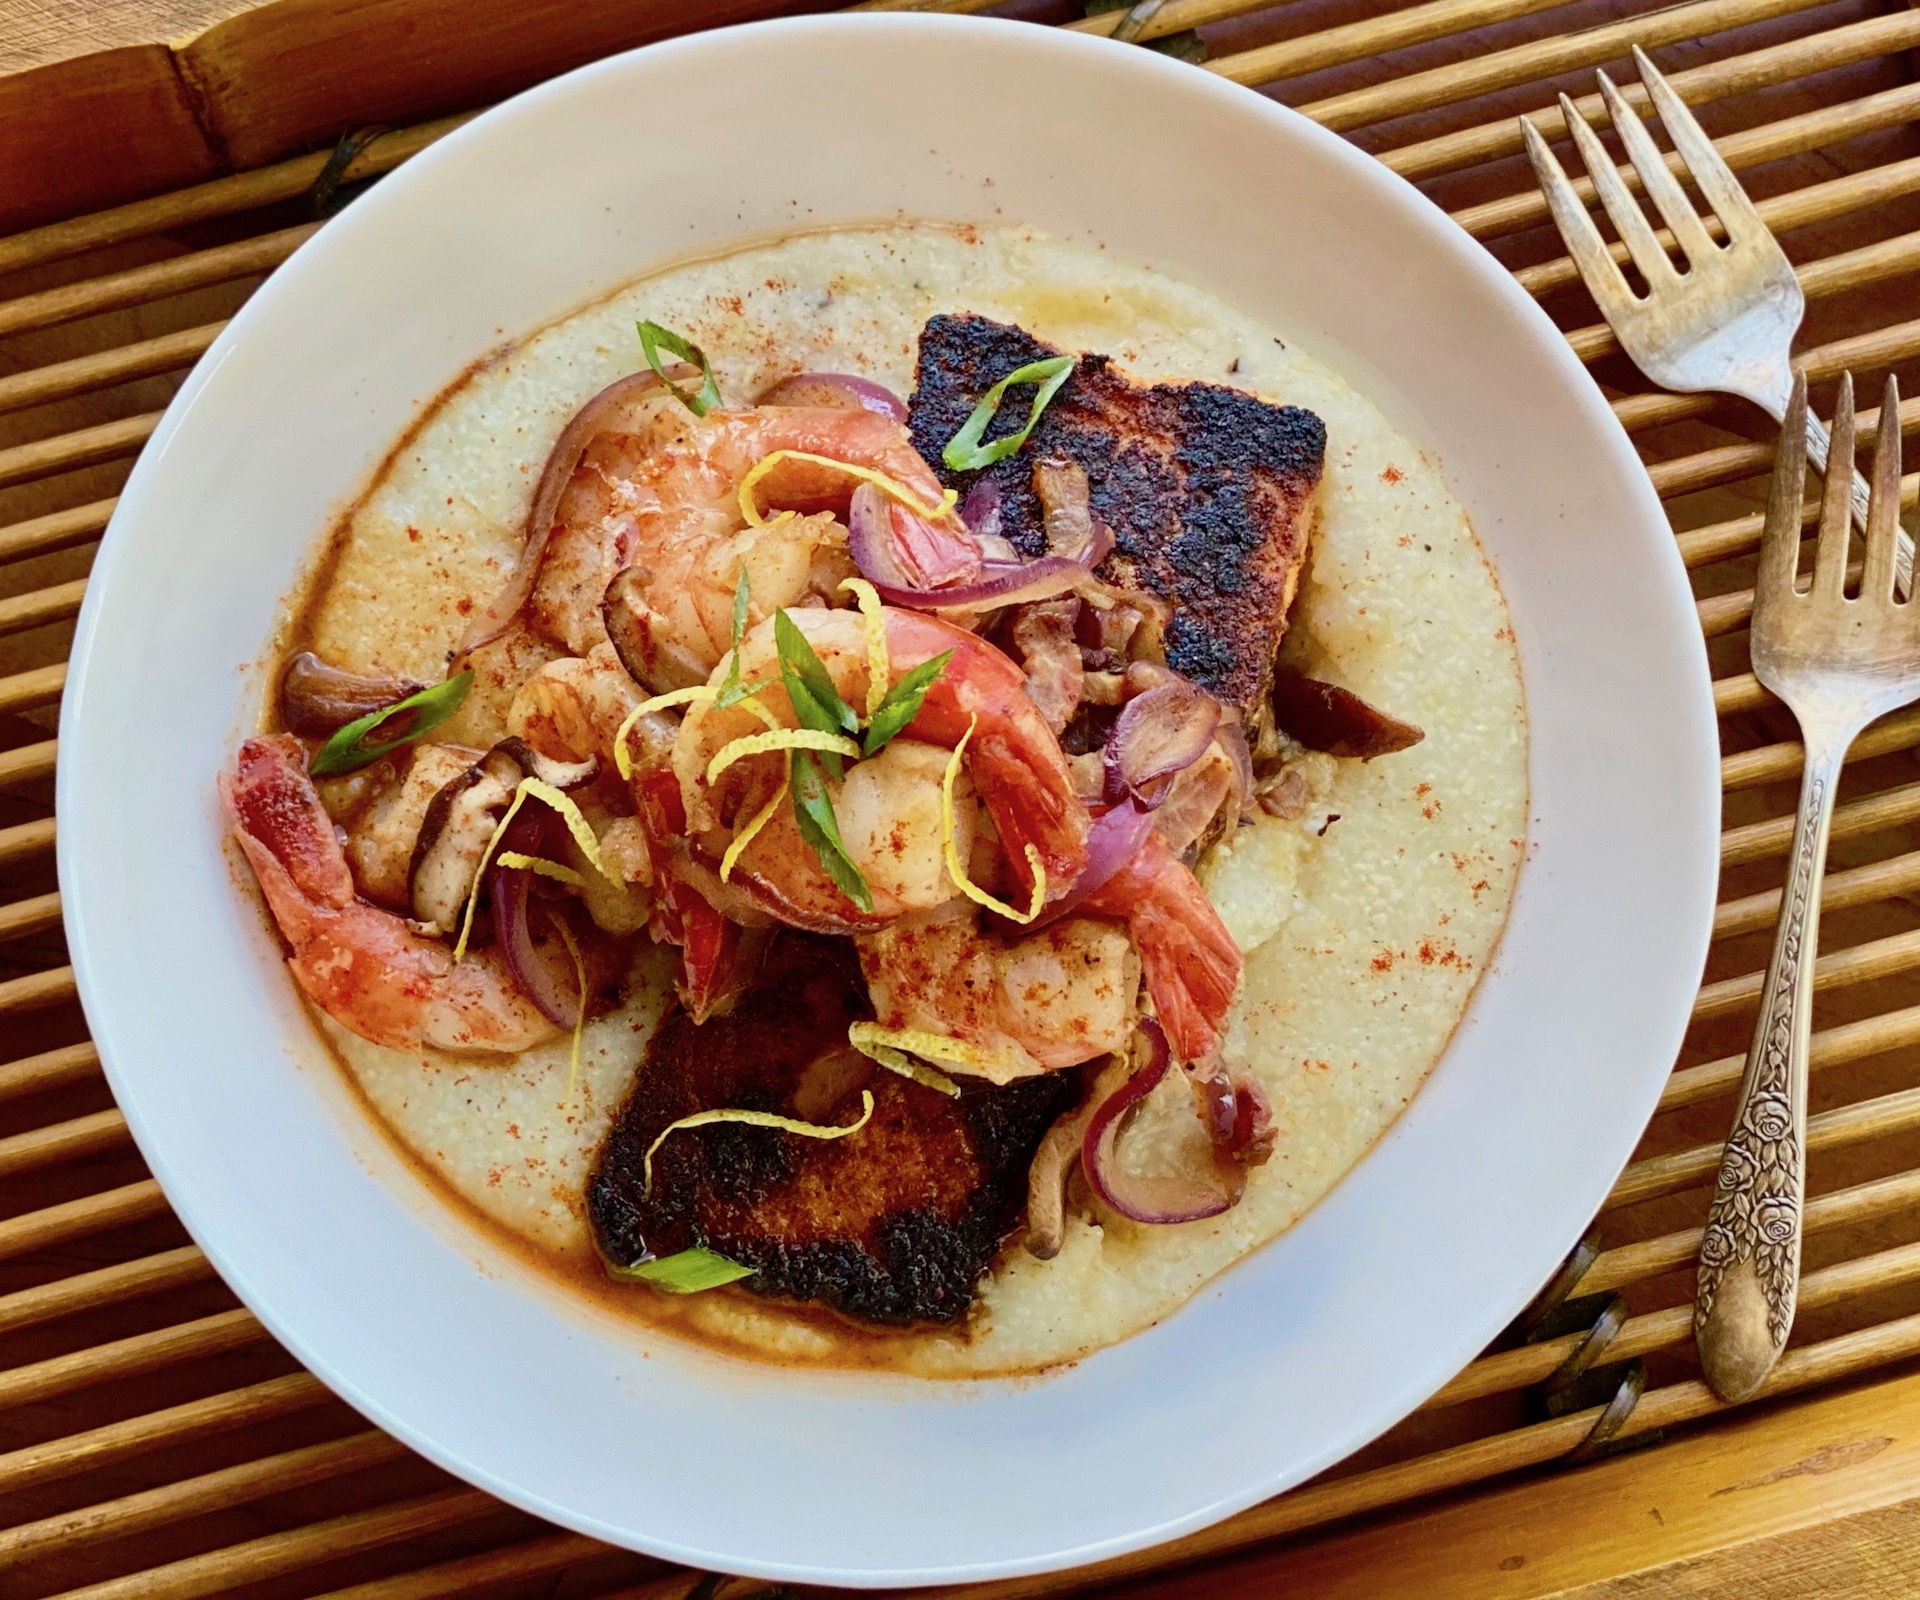 Blackened Salmon with Shrimp and Grits